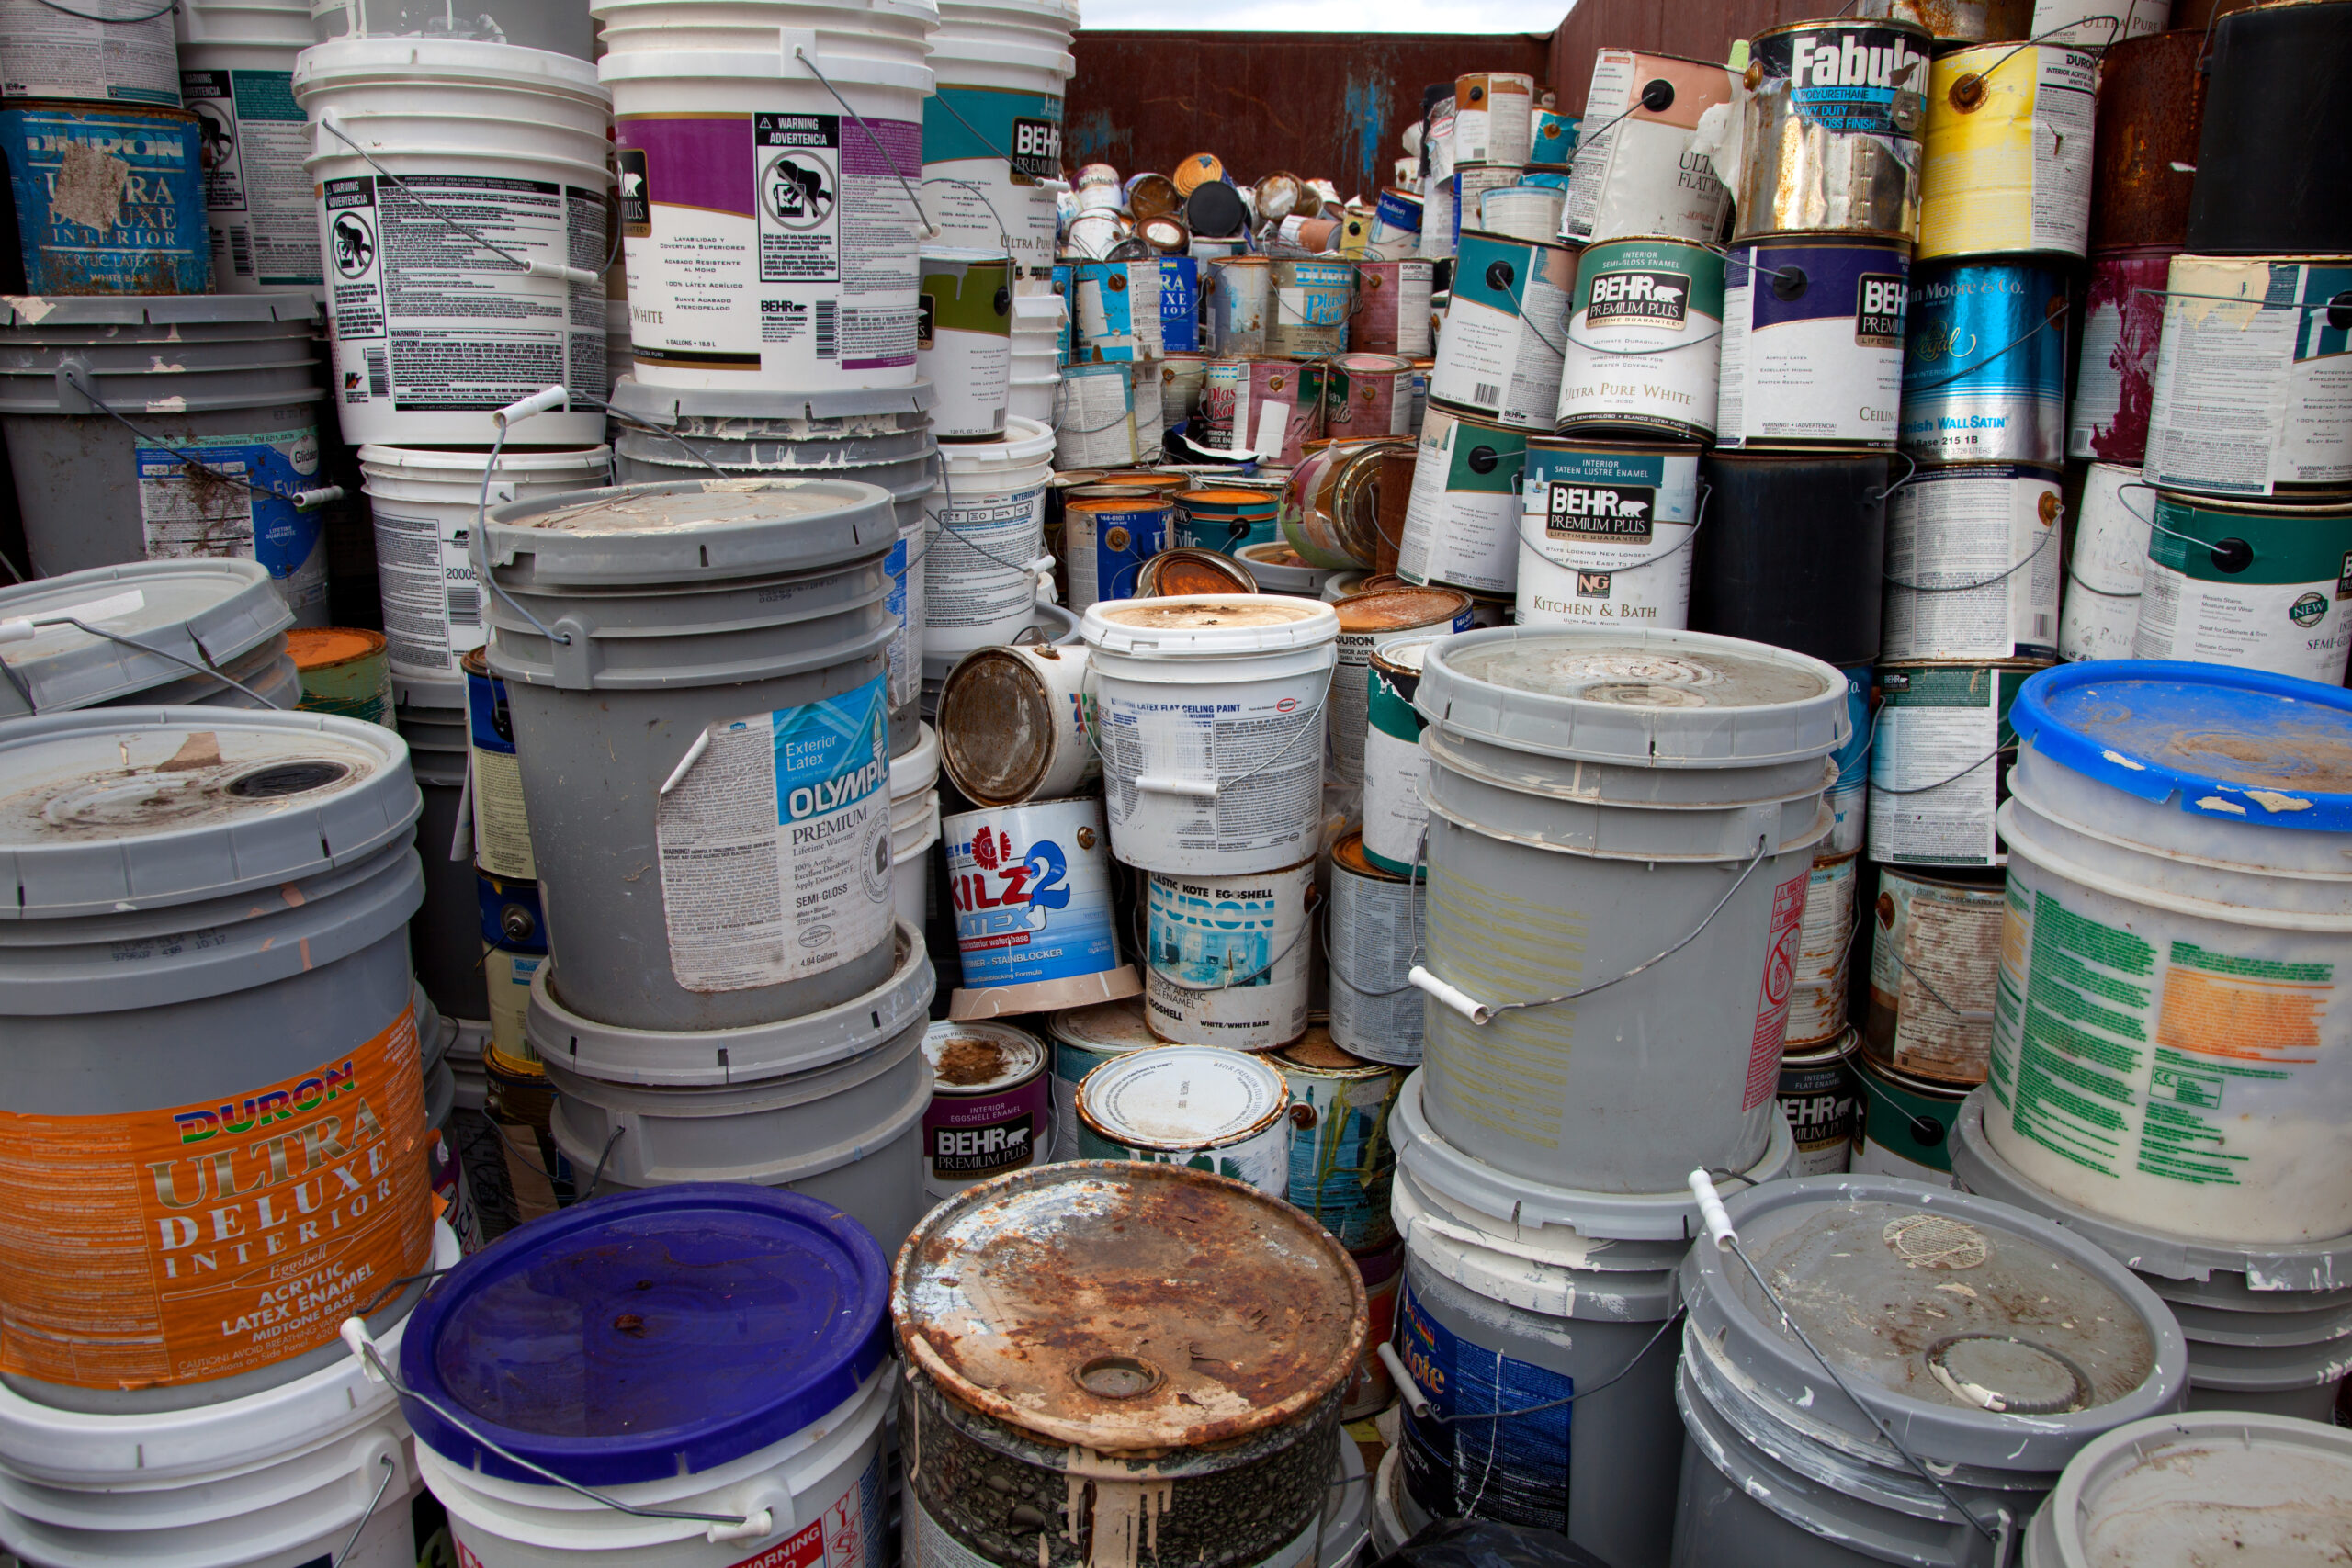 How to Safely Dispose of Paint: Oil or Latex